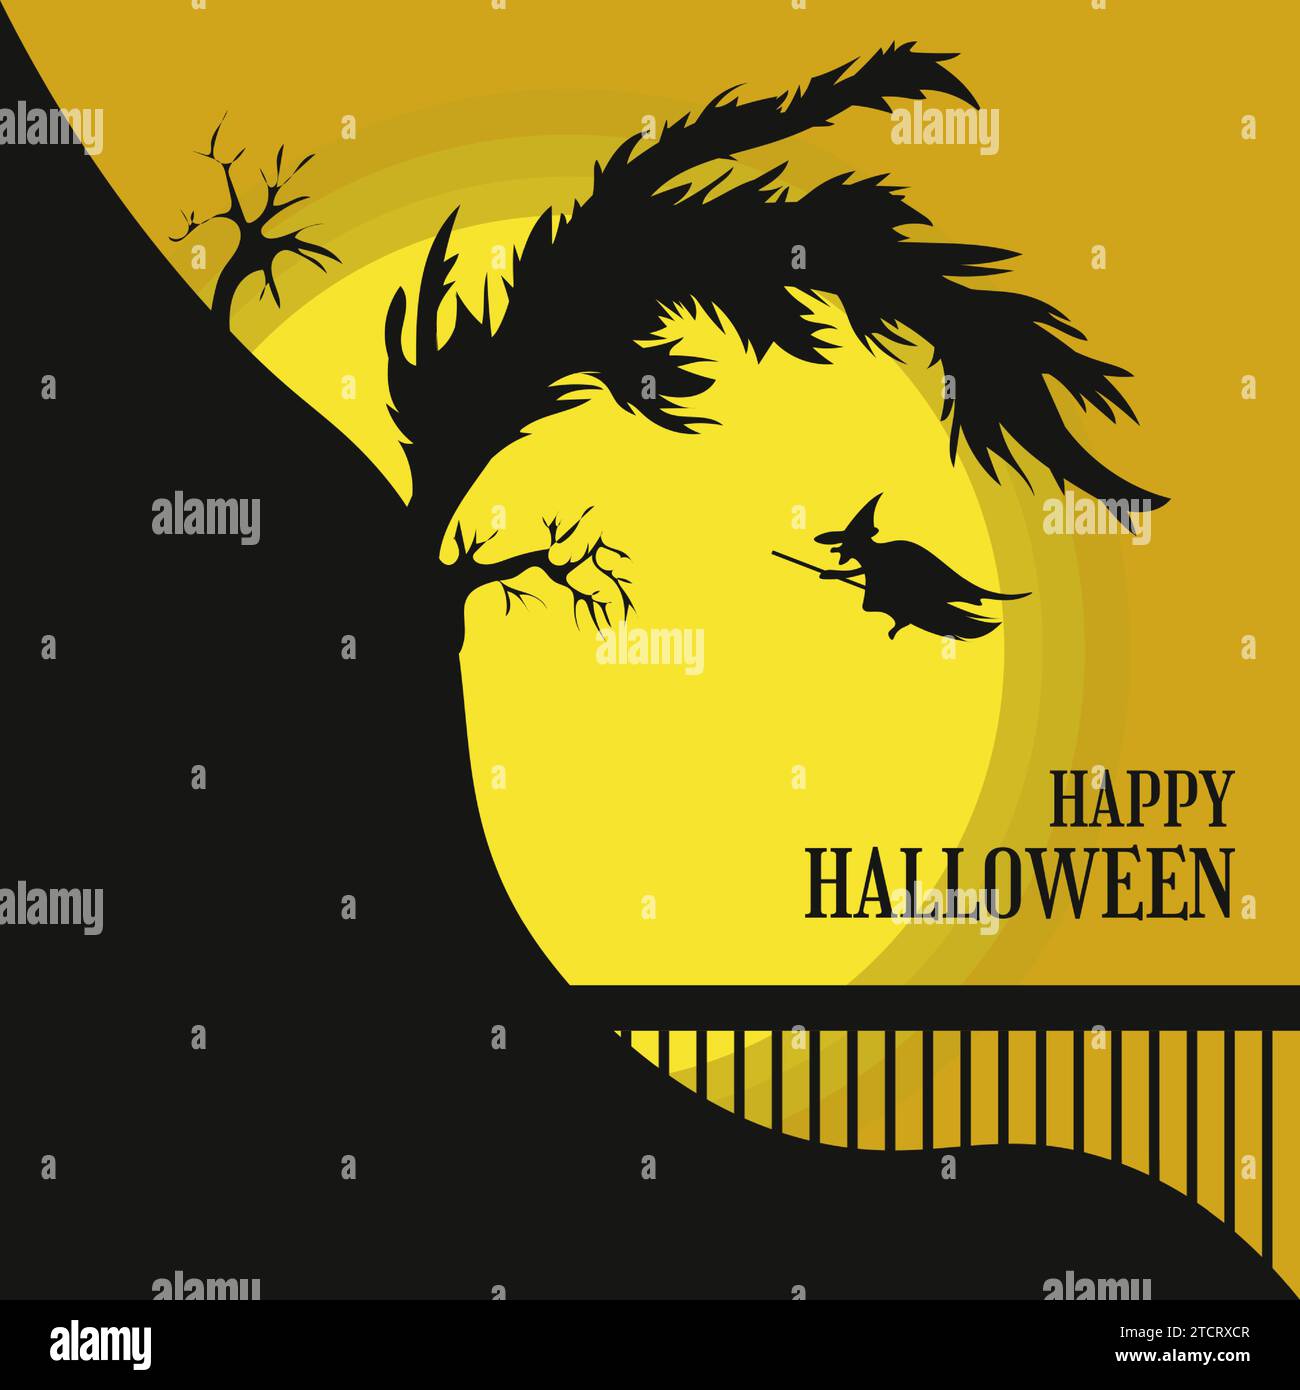 Halloween background illustration with silhouette of flying witch and spooky tree on cliff Stock Vector